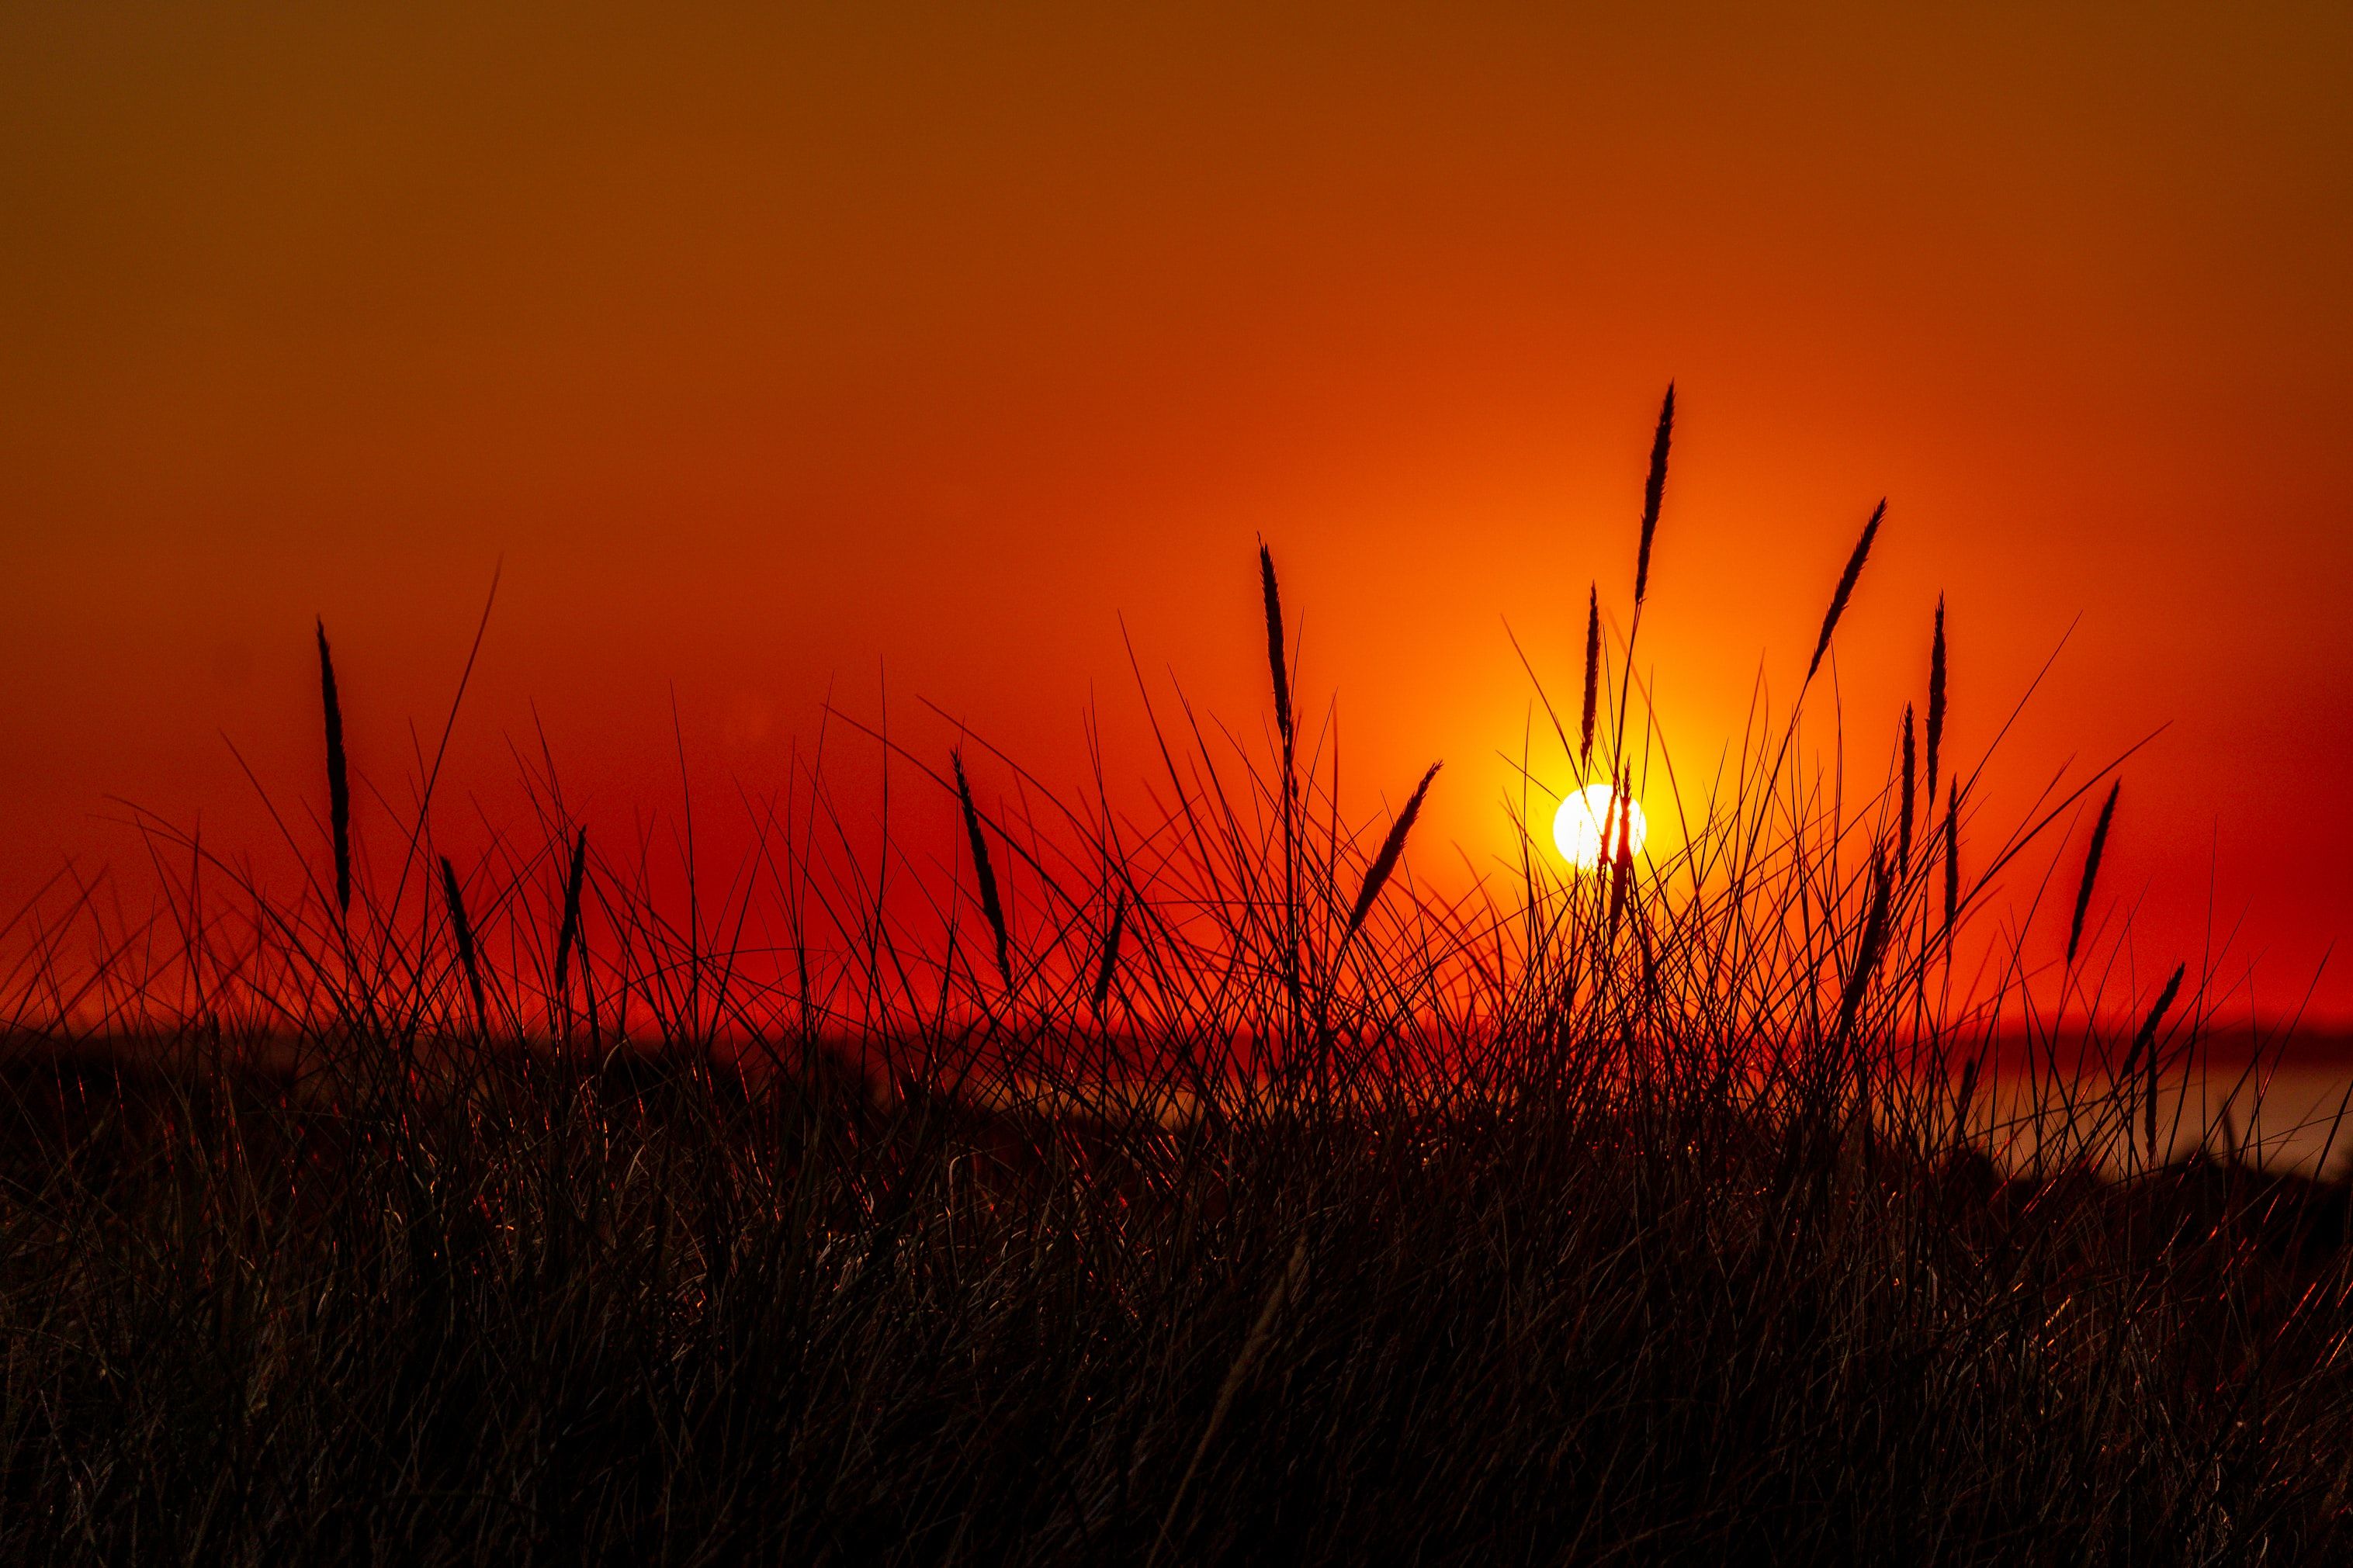 Sunrise 4K wallpaper for your desktop or mobile screen free and easy to download